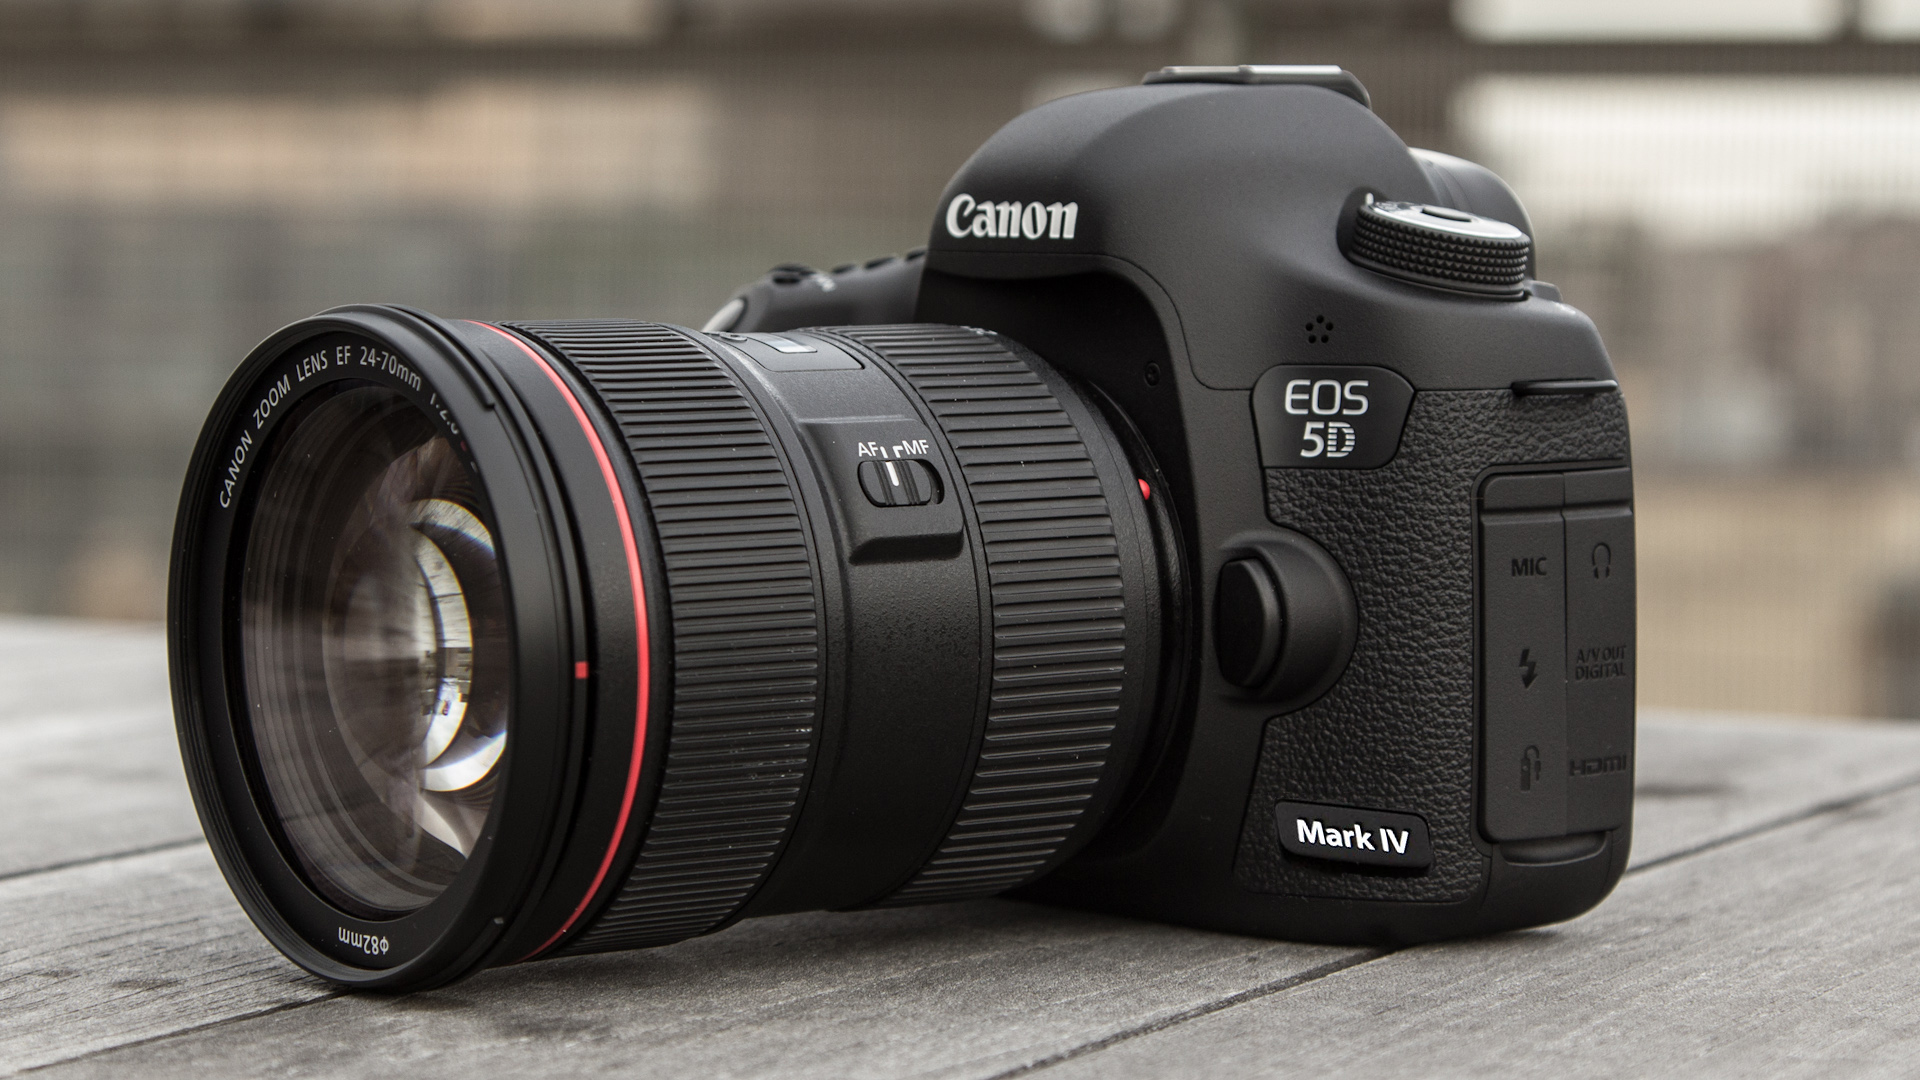 5D Mark IV will Have a “Canon DSLR First” Feature – Camera News at 